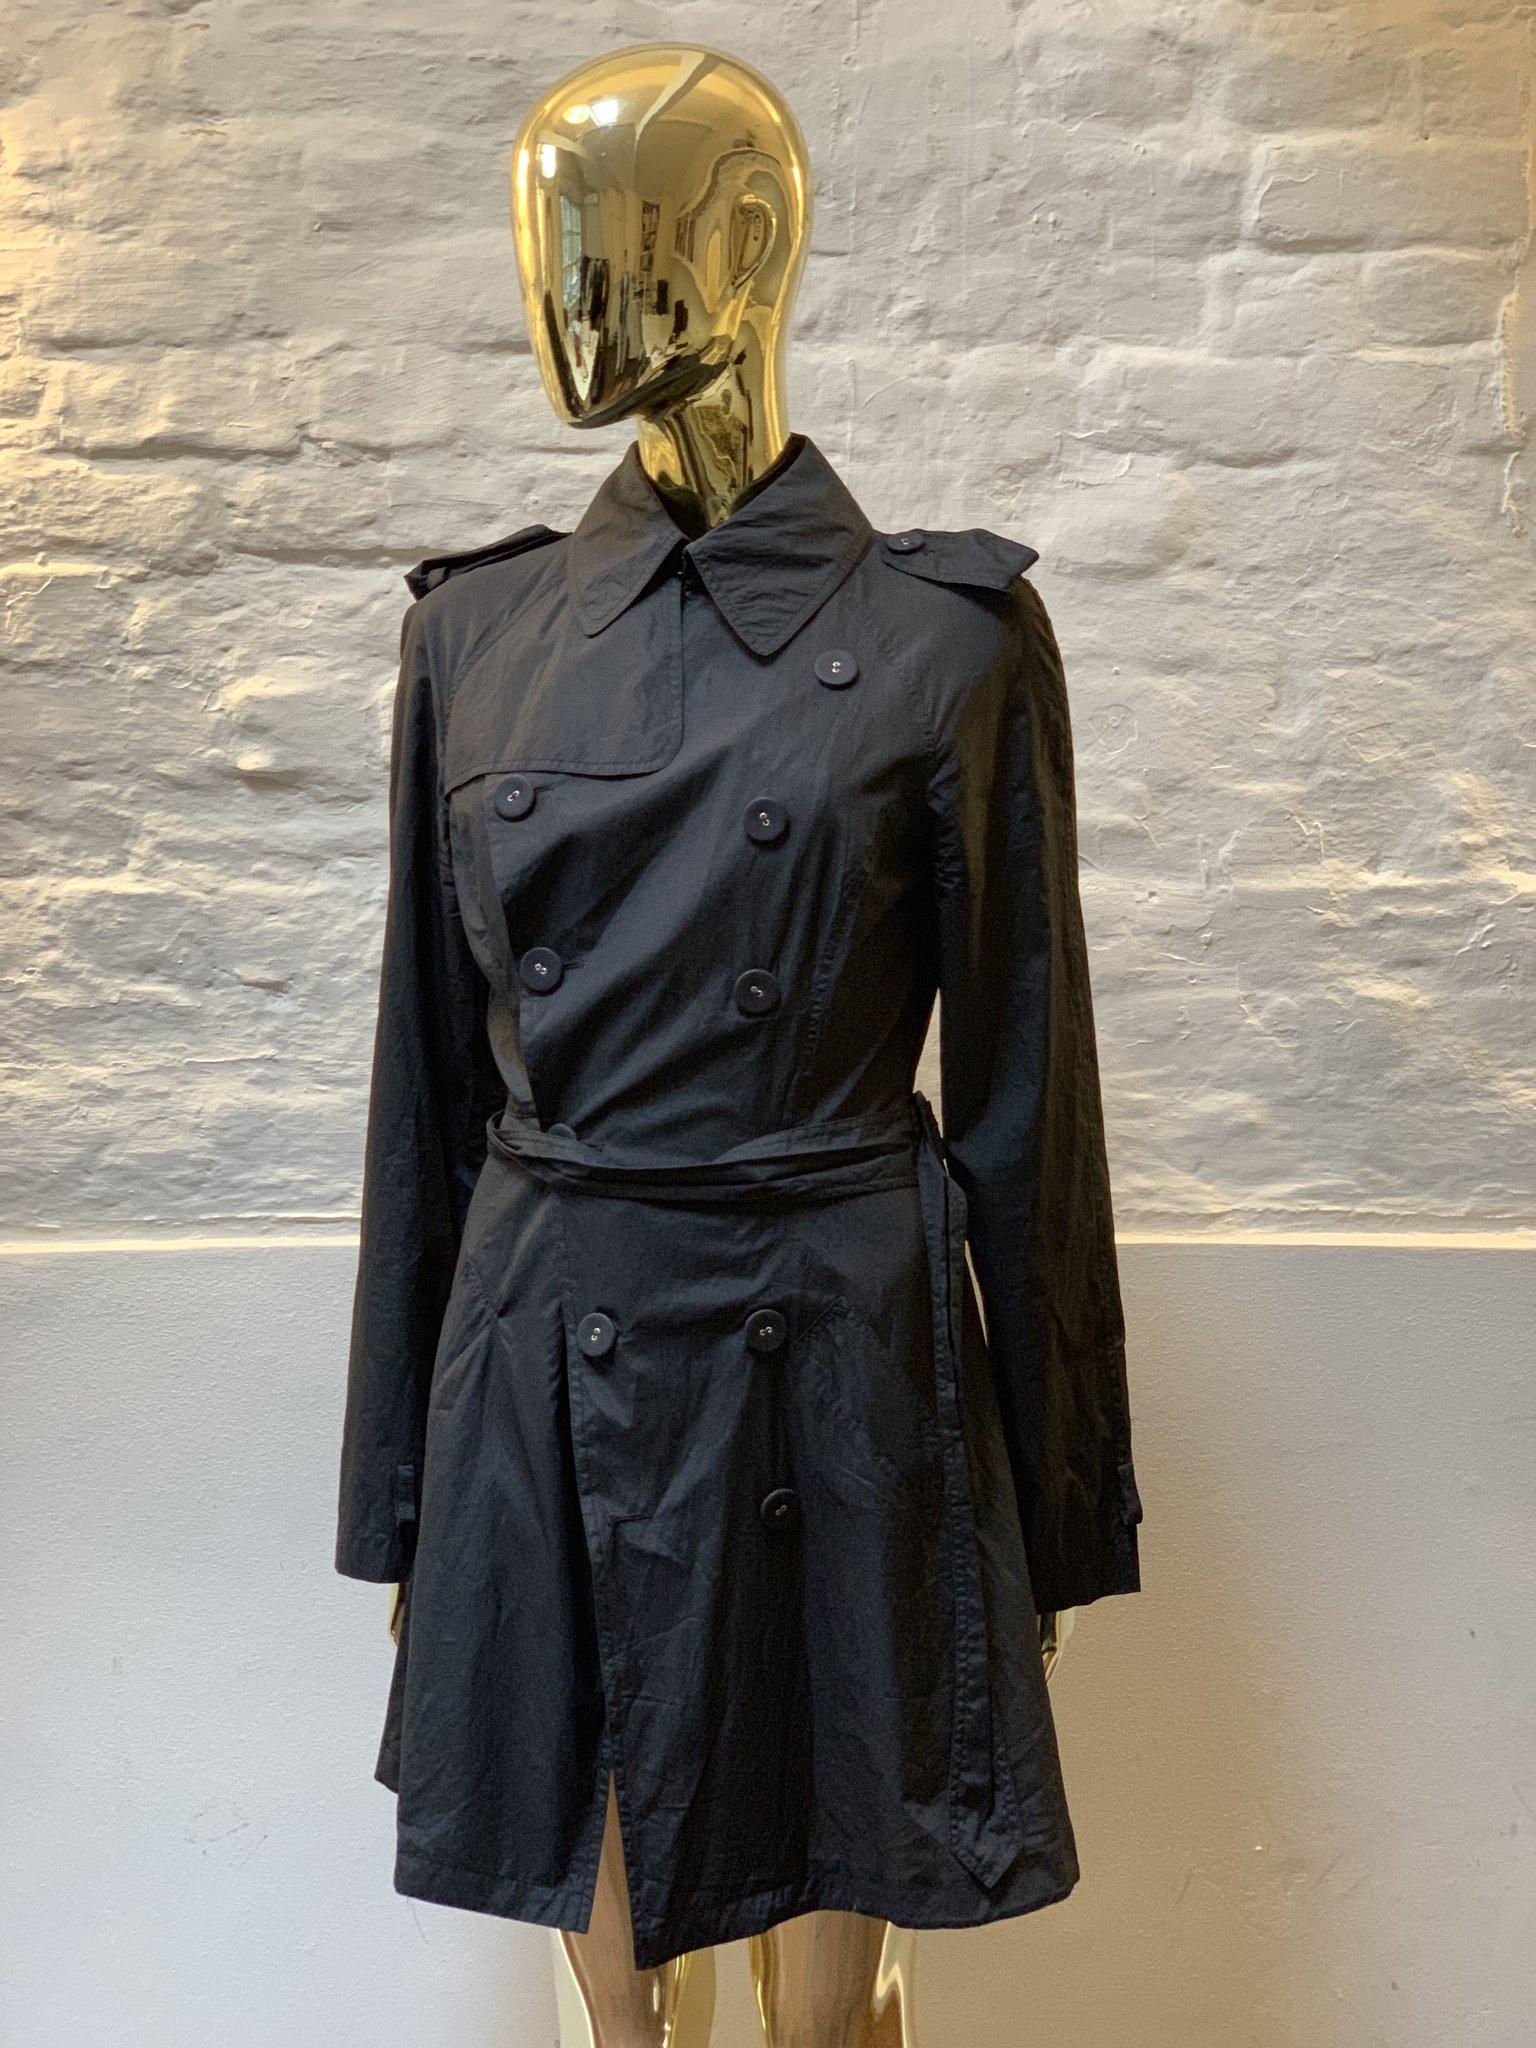 Jean Paul Gaultier 90s/00s Black Lightweight Rain Mac made in France from cotton. 

Jean Paul Gaultier disrupted the rarefied world of couture with his transgressive vision of beauty.

Inspired by punks, burlesque, screen goddesses, gender-benders,